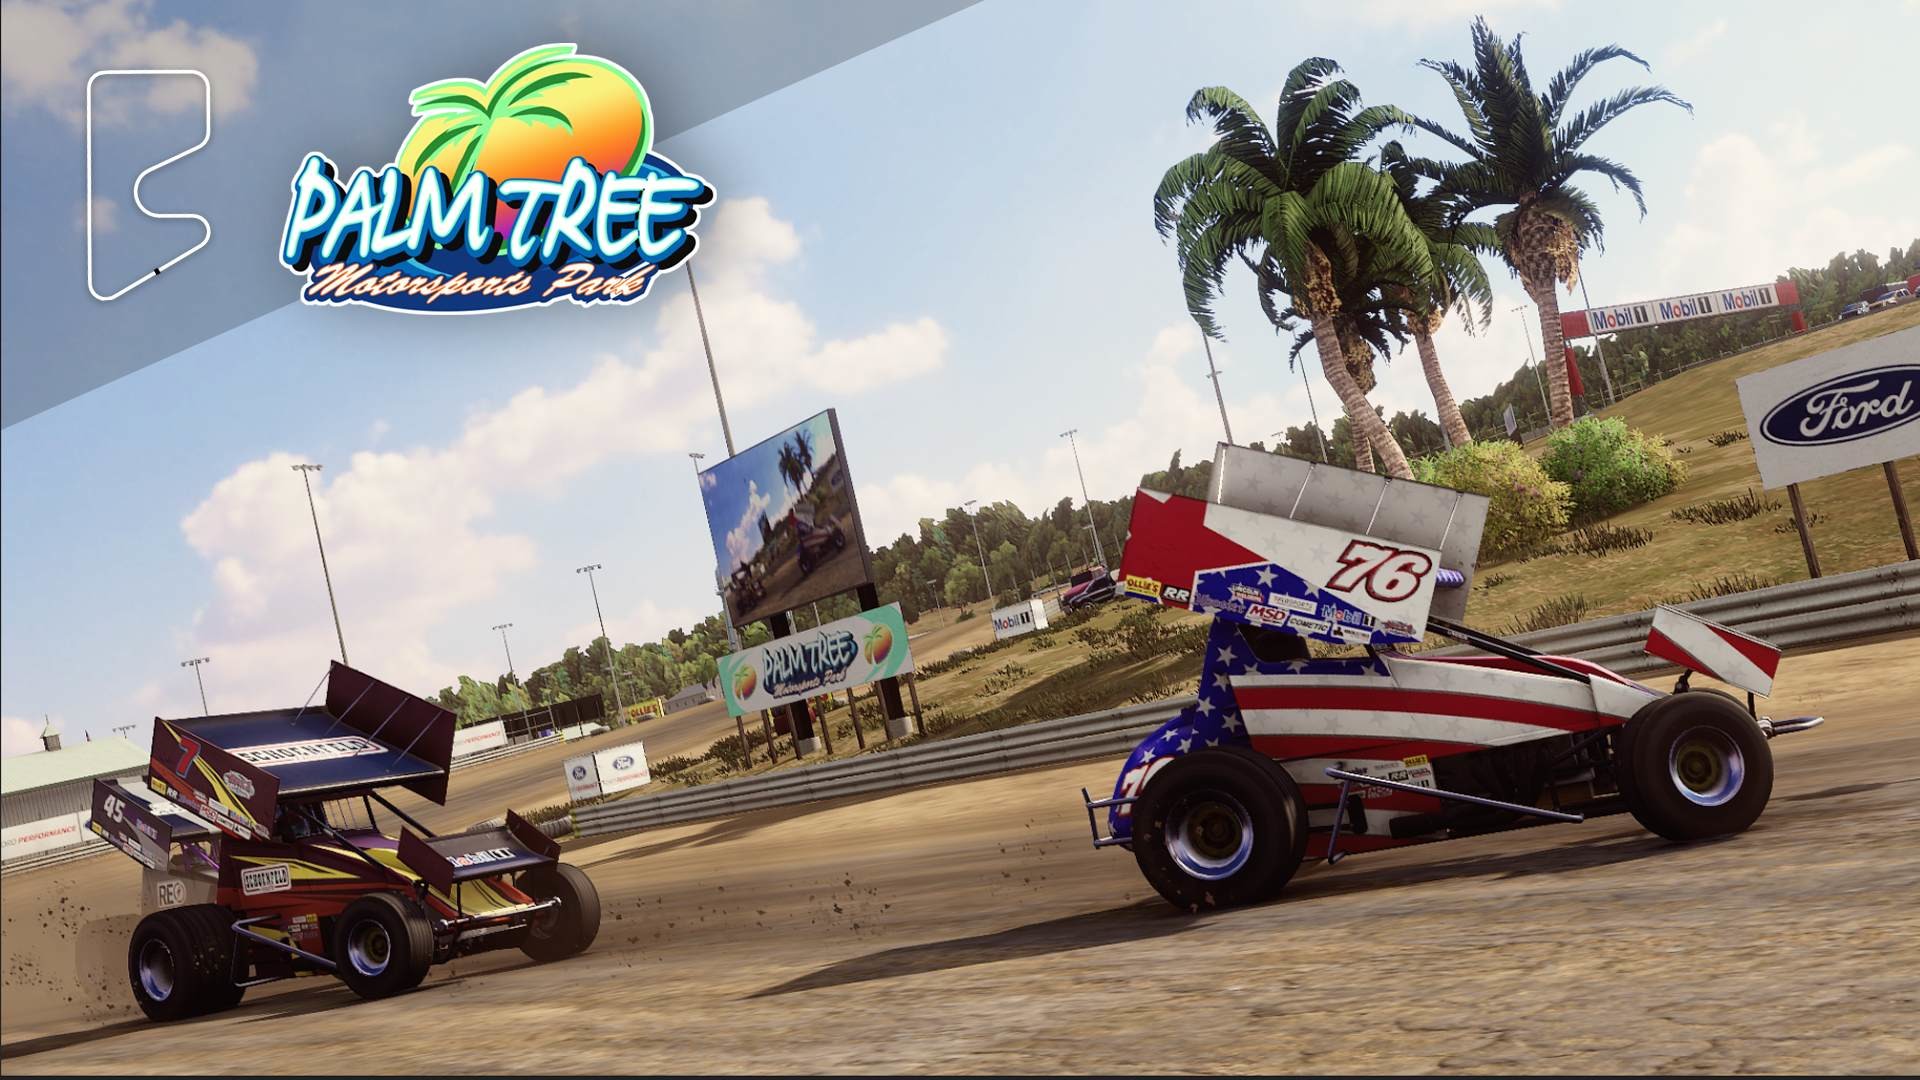 Tony Stewart's Sprint Car Racing - The Road Course Pack (Unlock_PackRoadCourse) Featured Screenshot #1